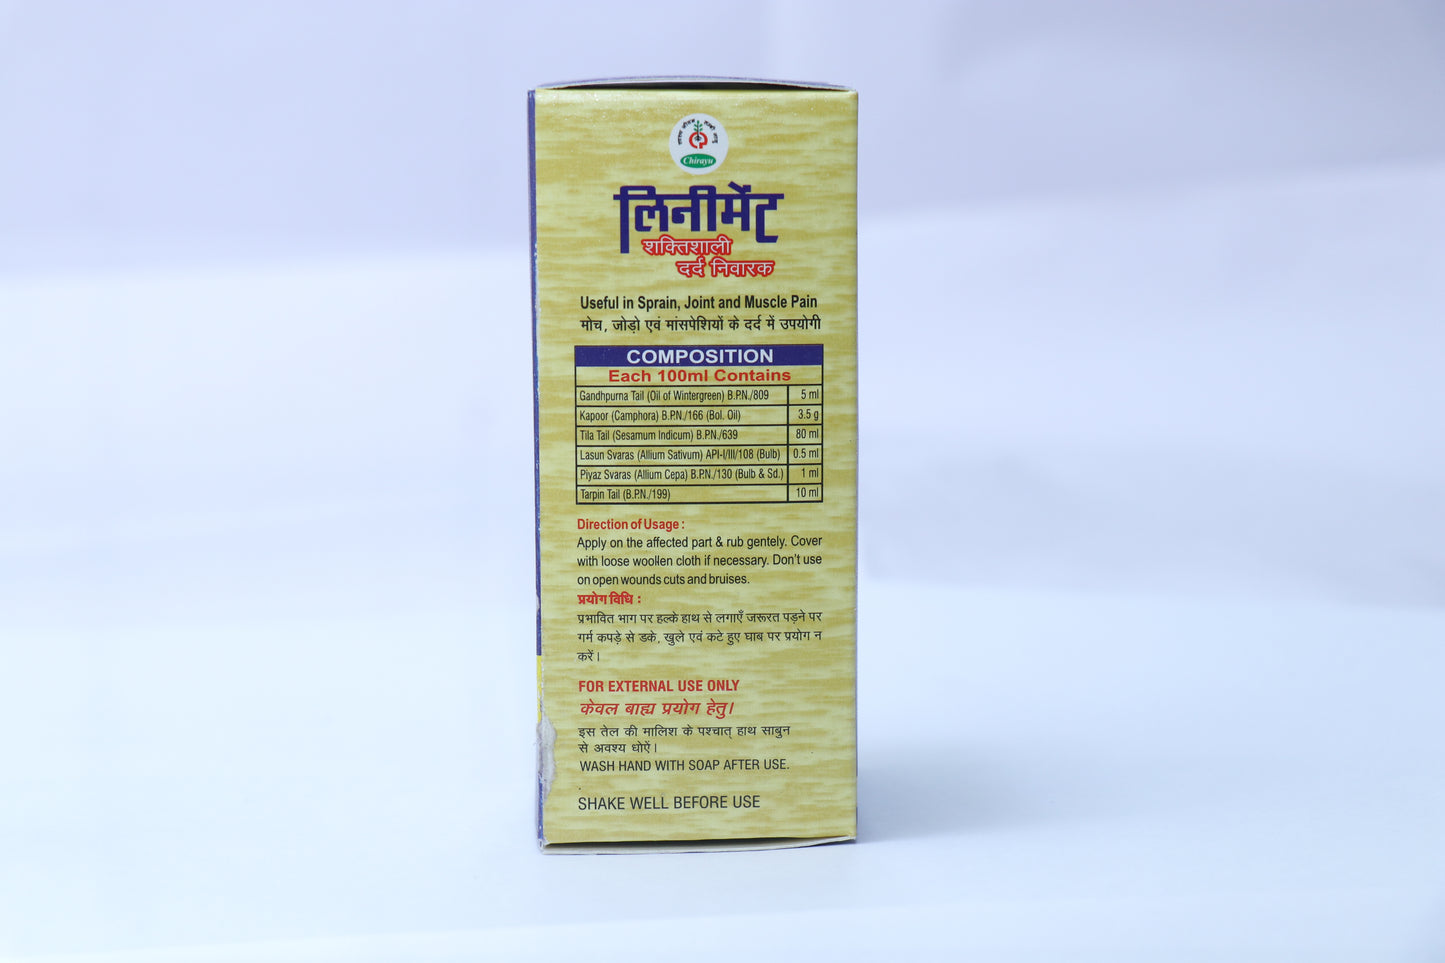 LINIMENT OIL: Ayurvedic / Natural Massage Oil Useful in Muscle Pain, Headache & Joint Pain, etc.